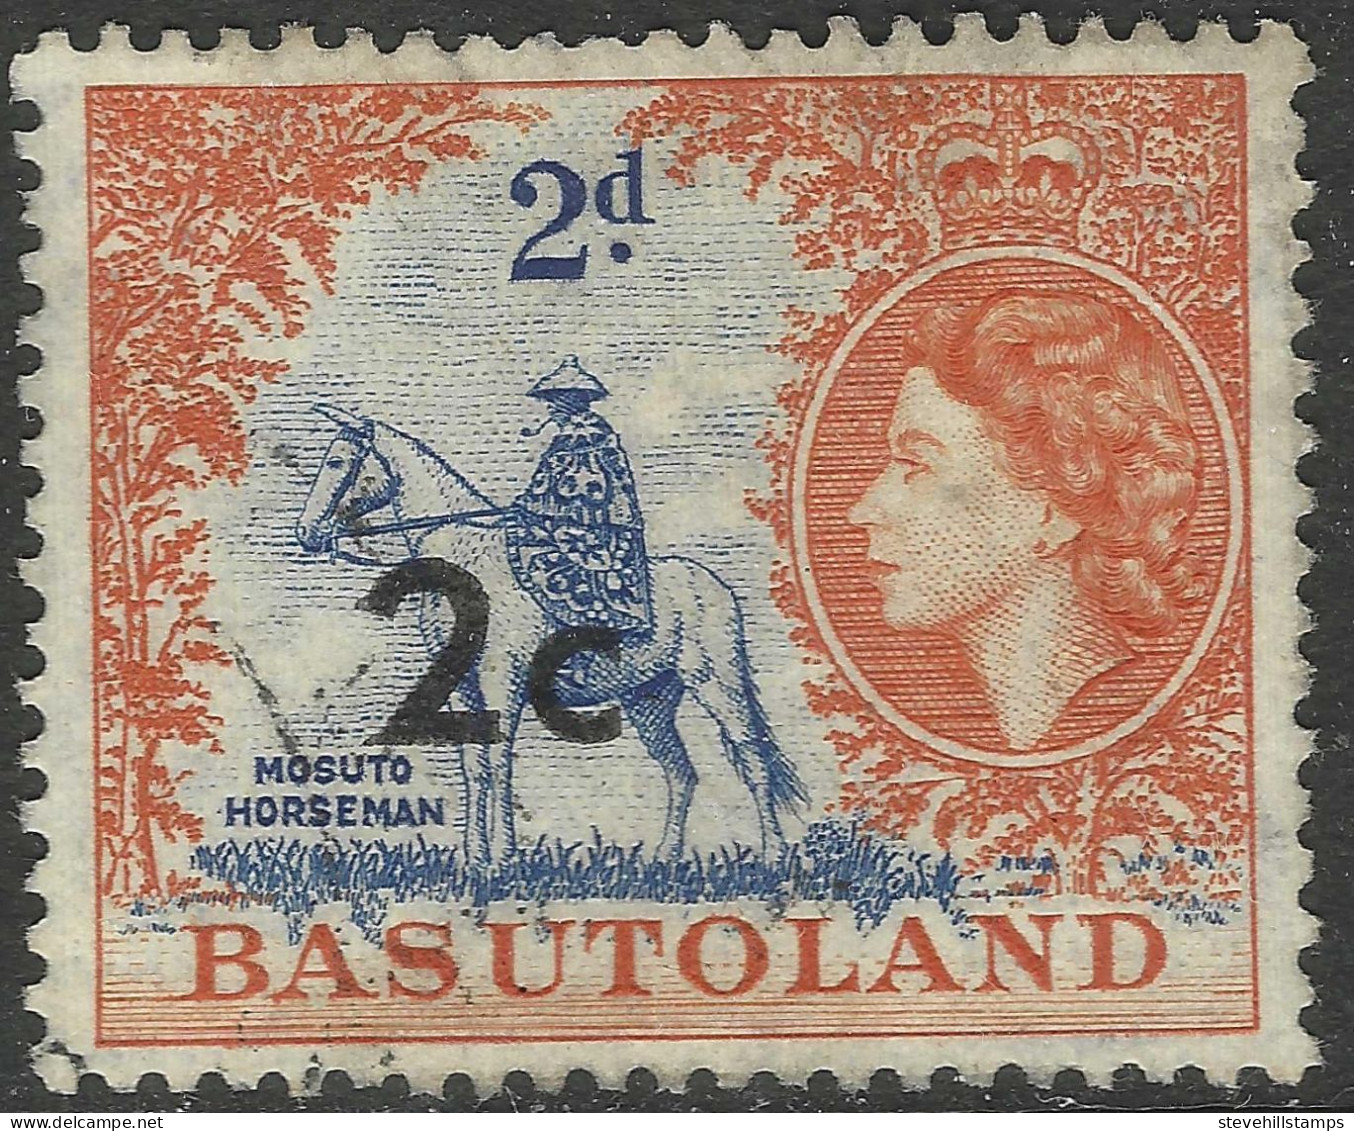 Basutoland. 1959 QEII New Currency Surcharge. 2c On 2d Used. SG60 - 1933-1964 Colonia Británica